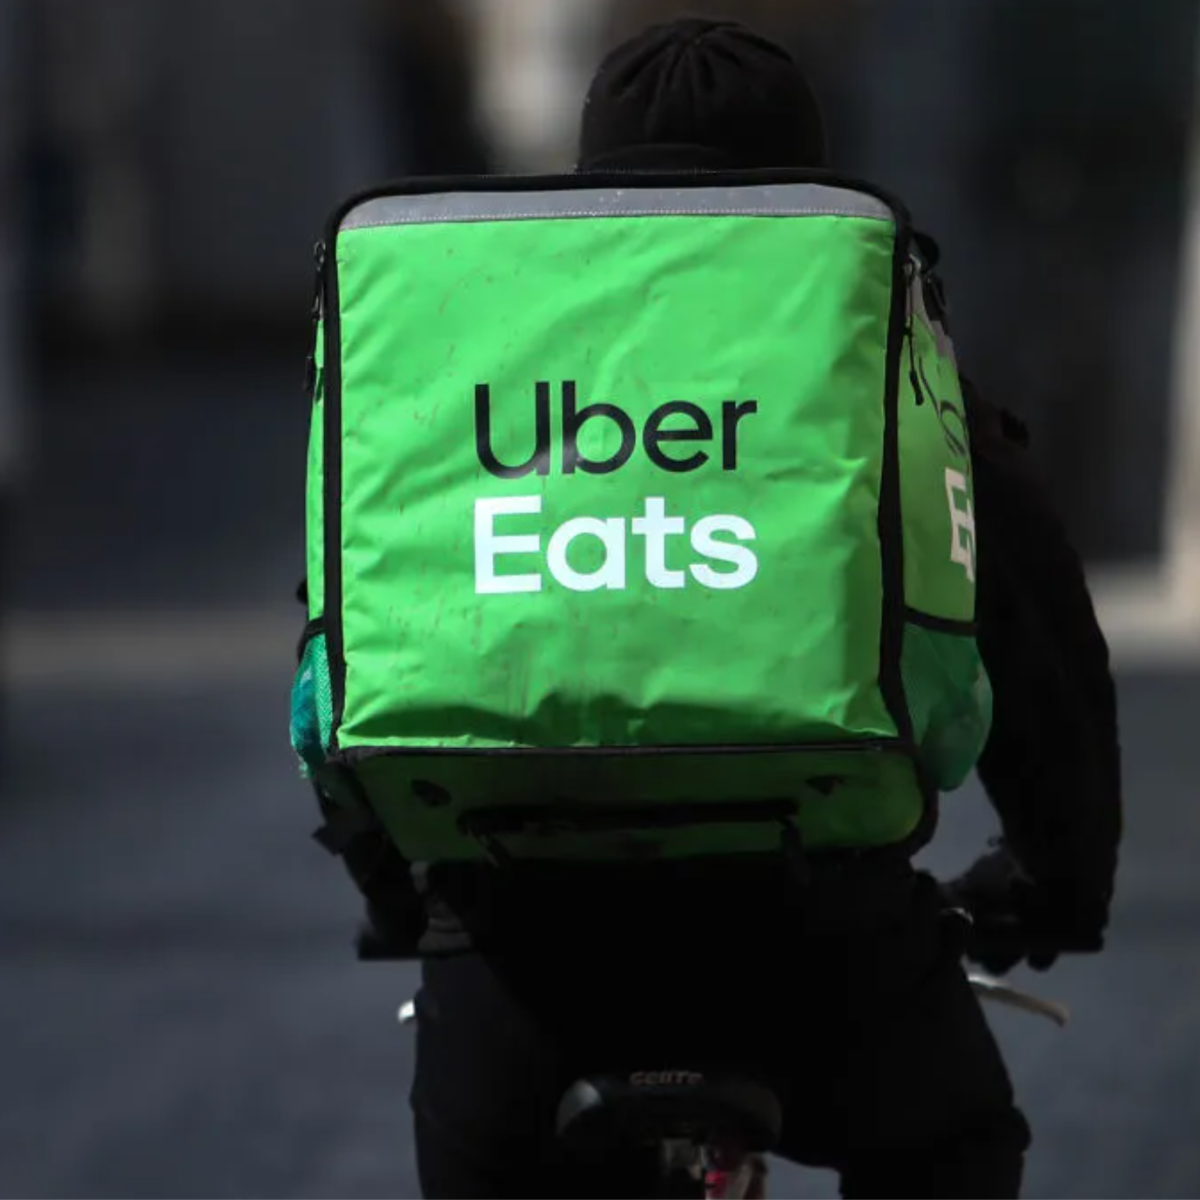 How Has the Rise Uber Eats and GrubHub Impacted the Landscape for Restaurant Workers?